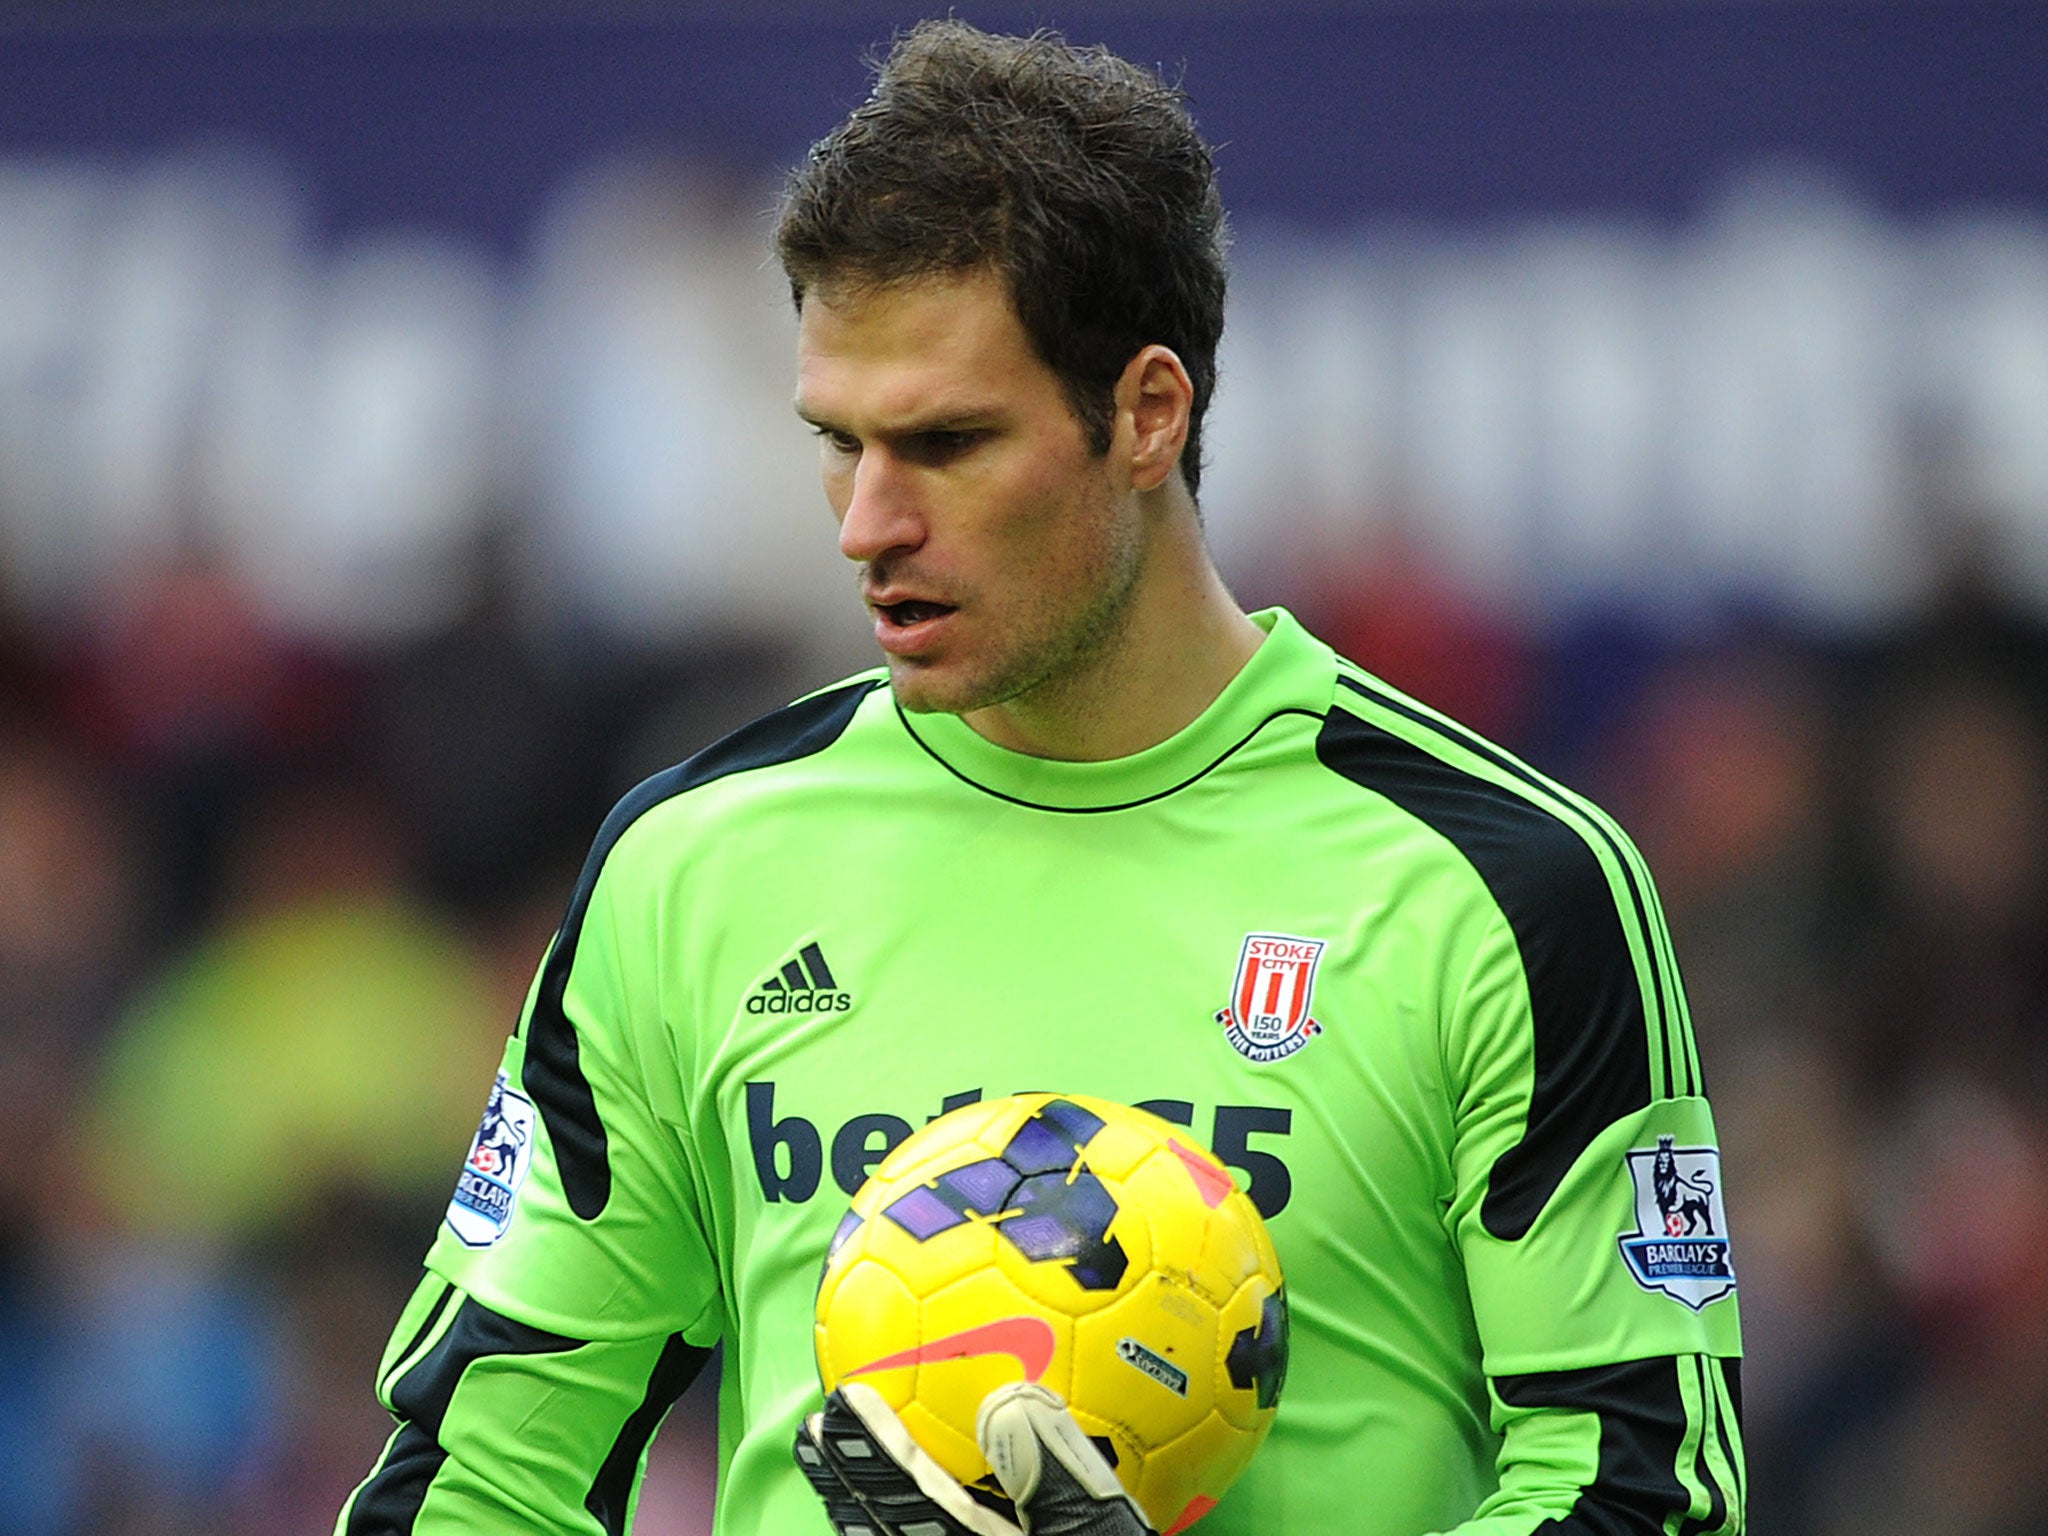 Asmir Begovic in action during Stoke's 1-1 draw with Southampton, in which he opened the scoring